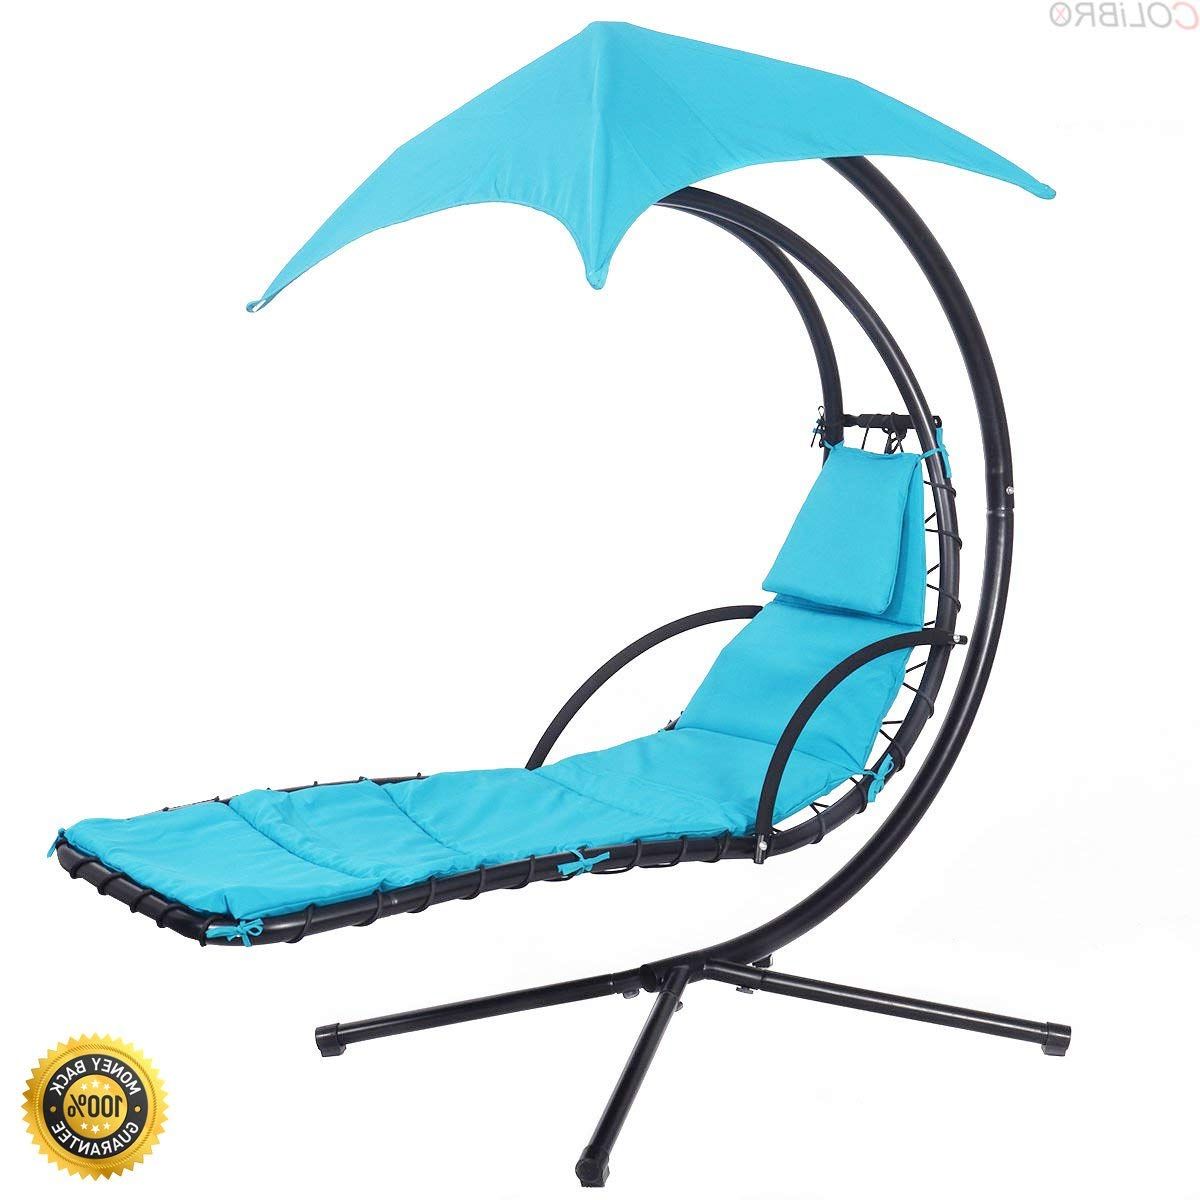 Patio Loveseat Canopy Hammock Porch Swings With Stand For Latest Cheap Porch Swing Hammock, Find Porch Swing Hammock Deals On (View 29 of 30)